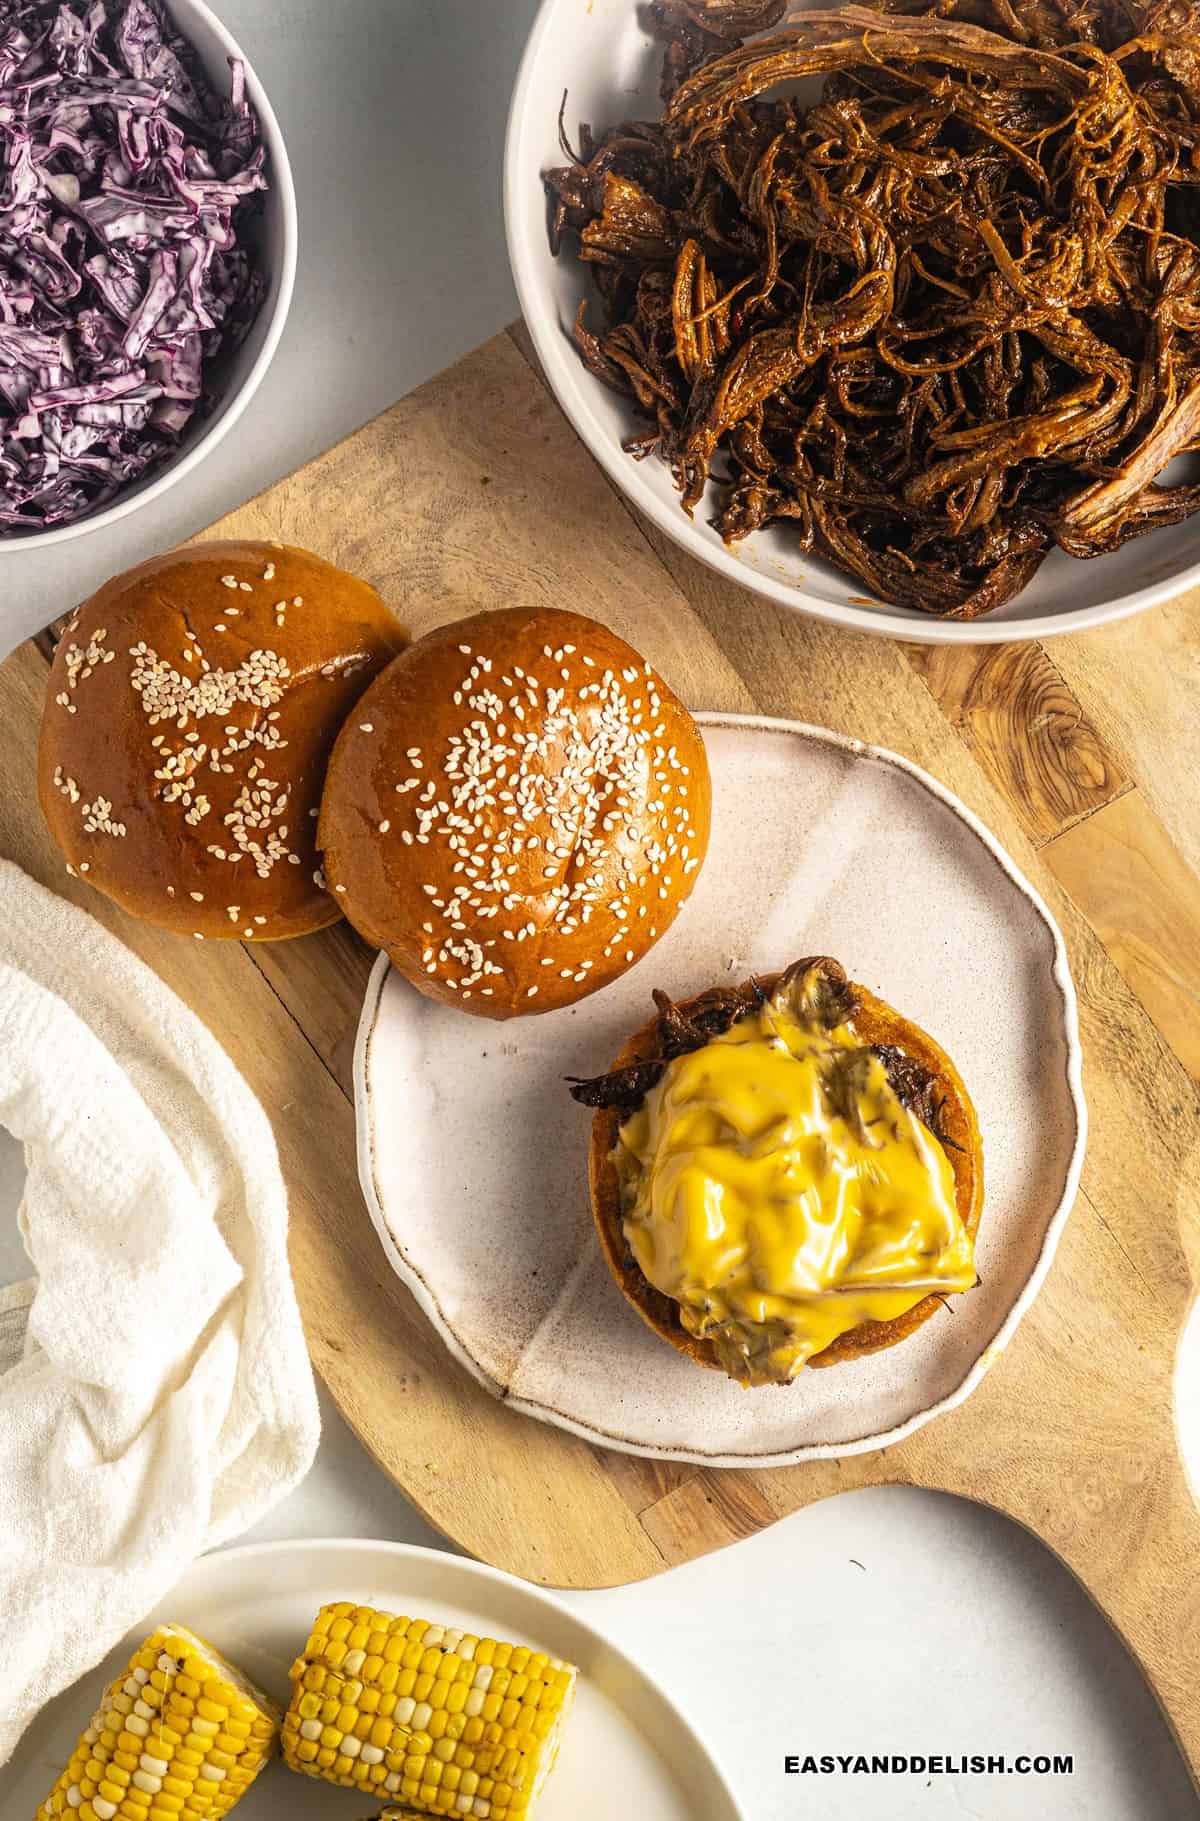 shredded beef and melted cheese in a burger bun with sides around it.